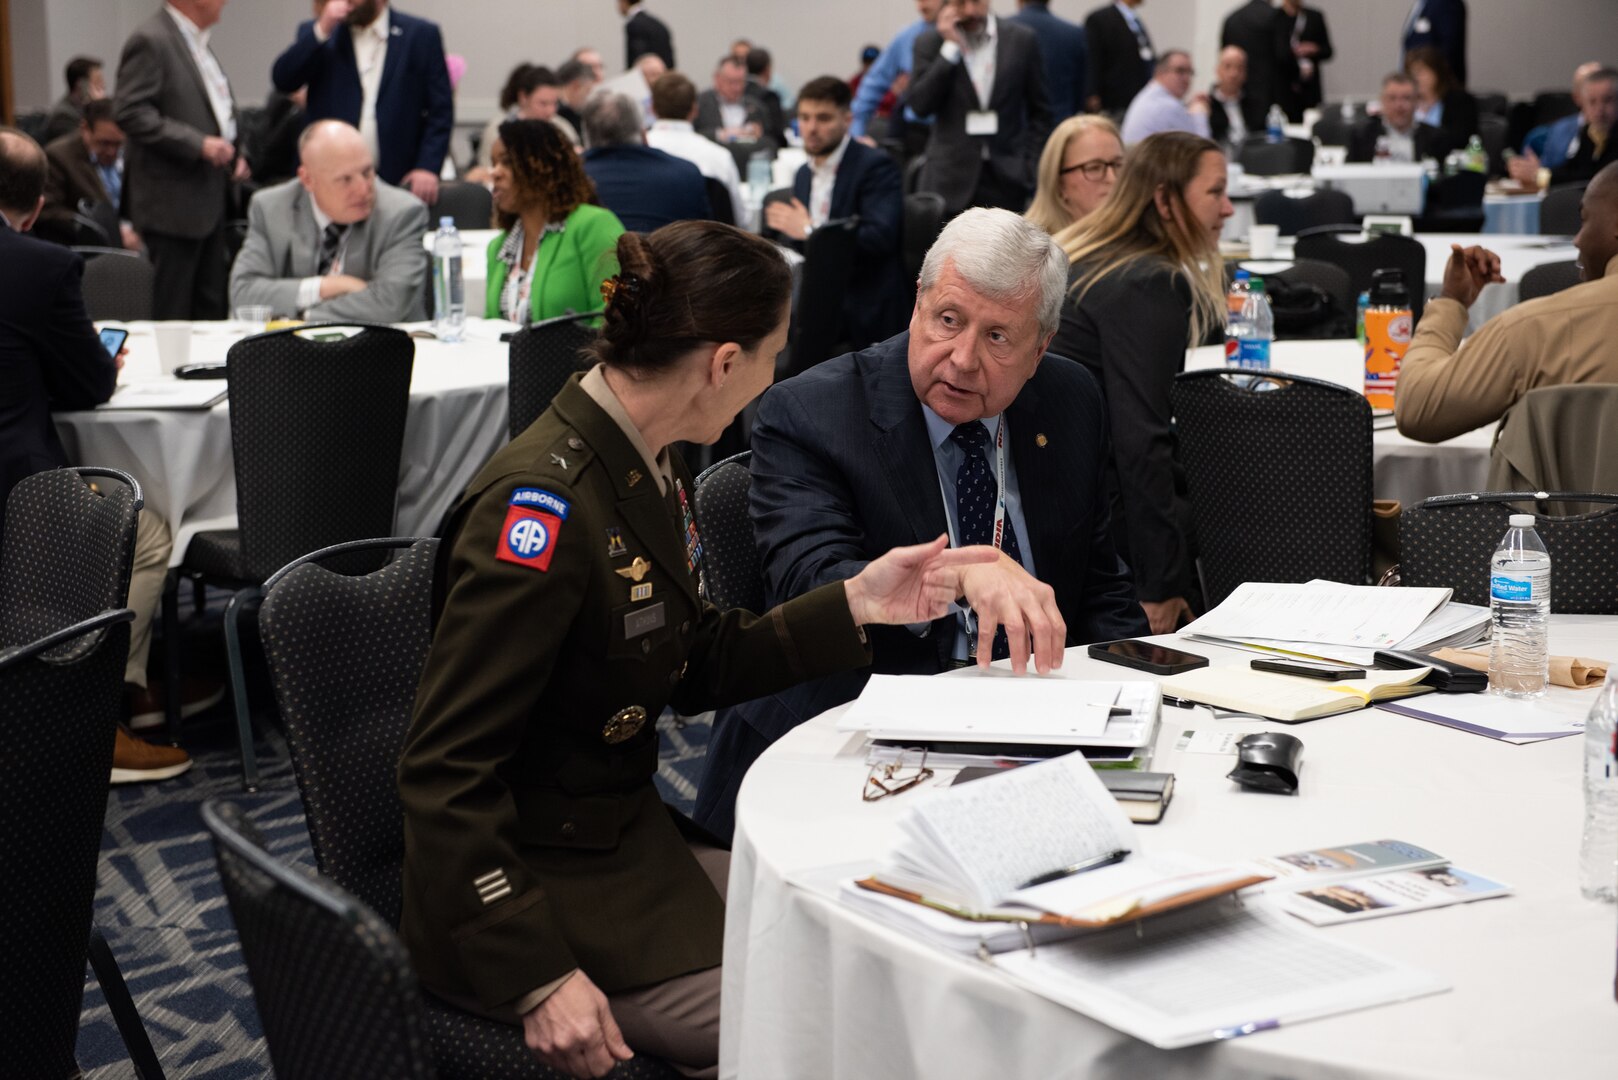 A white haired man in a business suit chats with a dark haired woman in an Army dress uniform (olive green coat and tan pants) at a table with a white tablecloth in a ballroom.